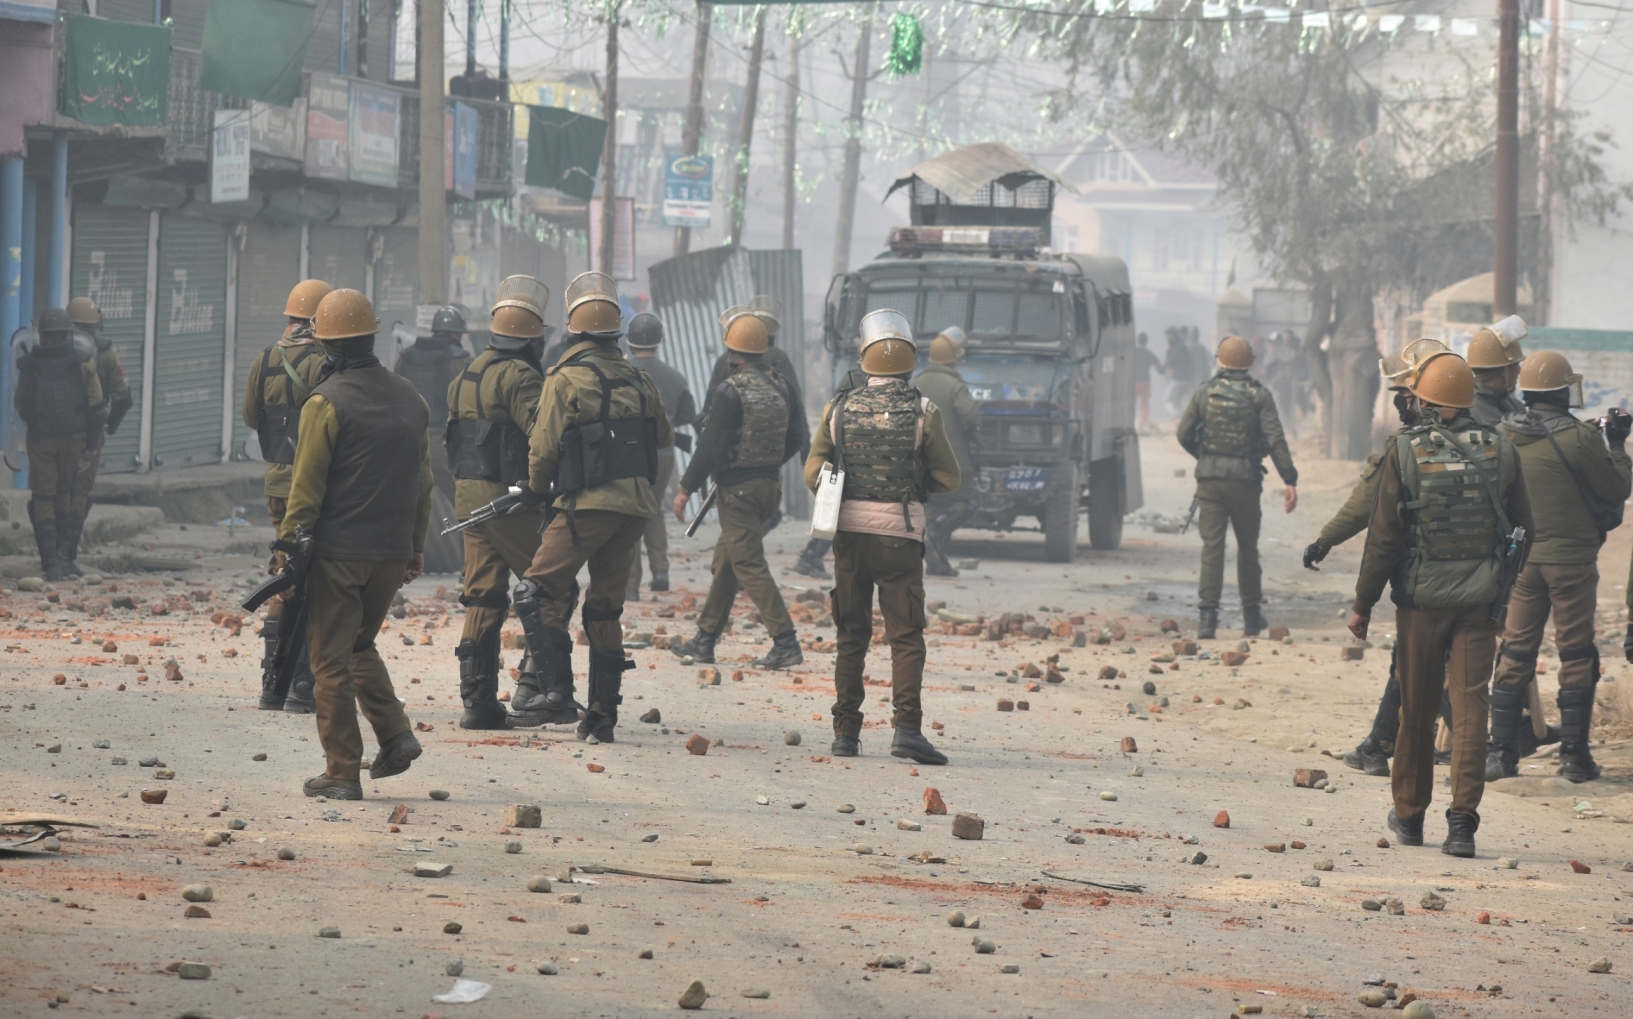 2018 clashes in Kashmir between Indian Police and Protesters